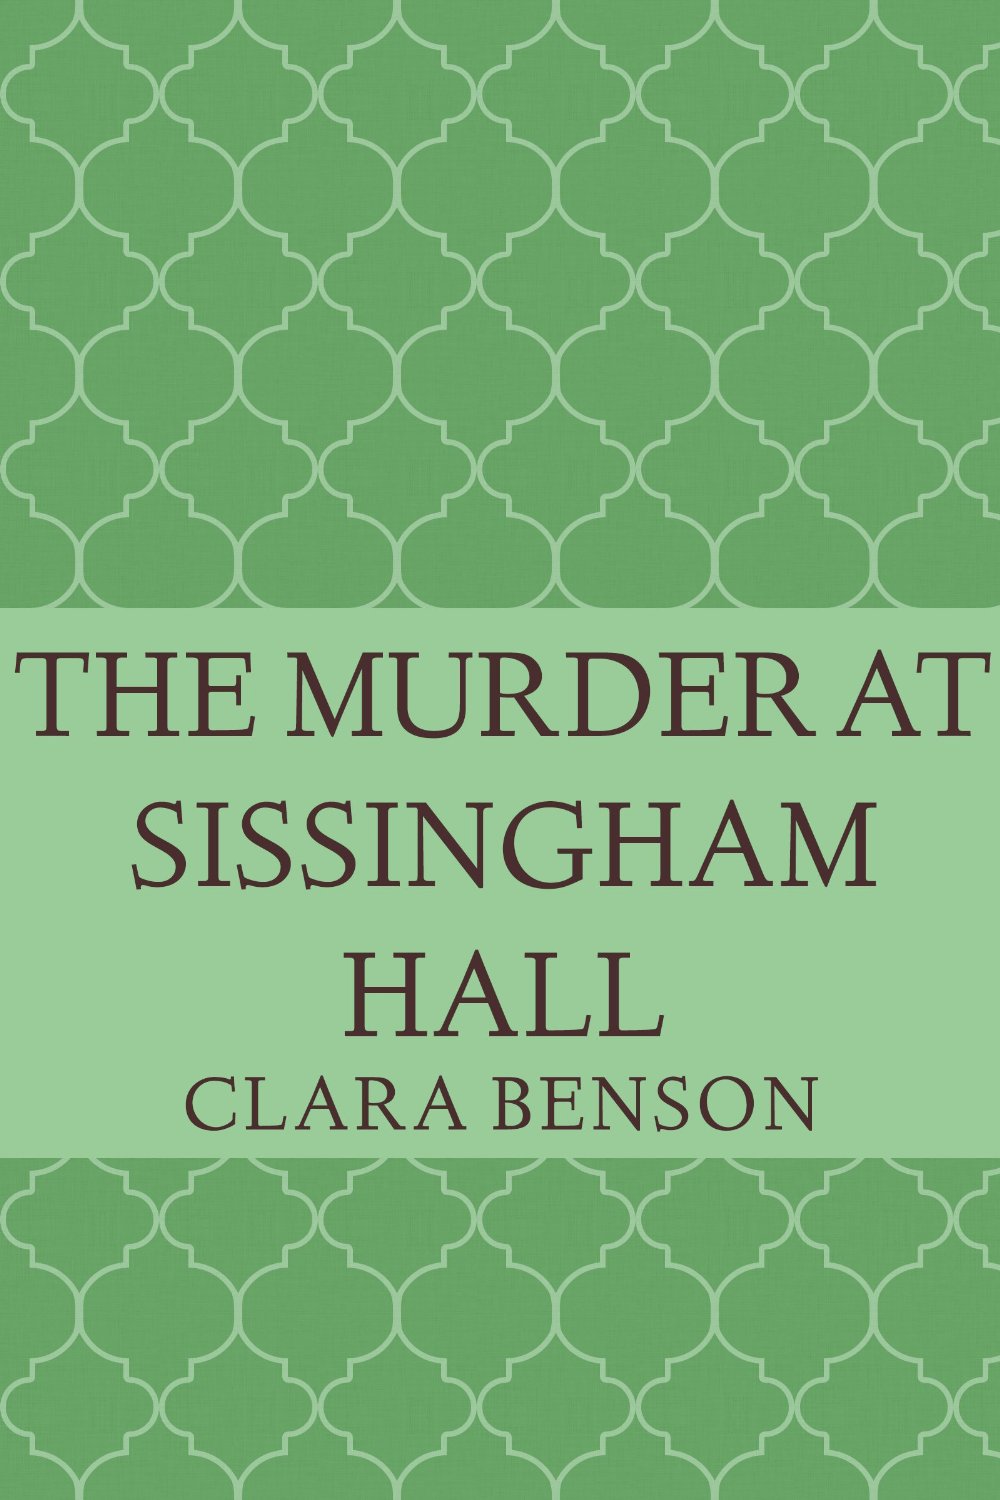 The Murder at Sissingham Hall (An Angela Marchmont Mystery Book 1) by Clara Benson